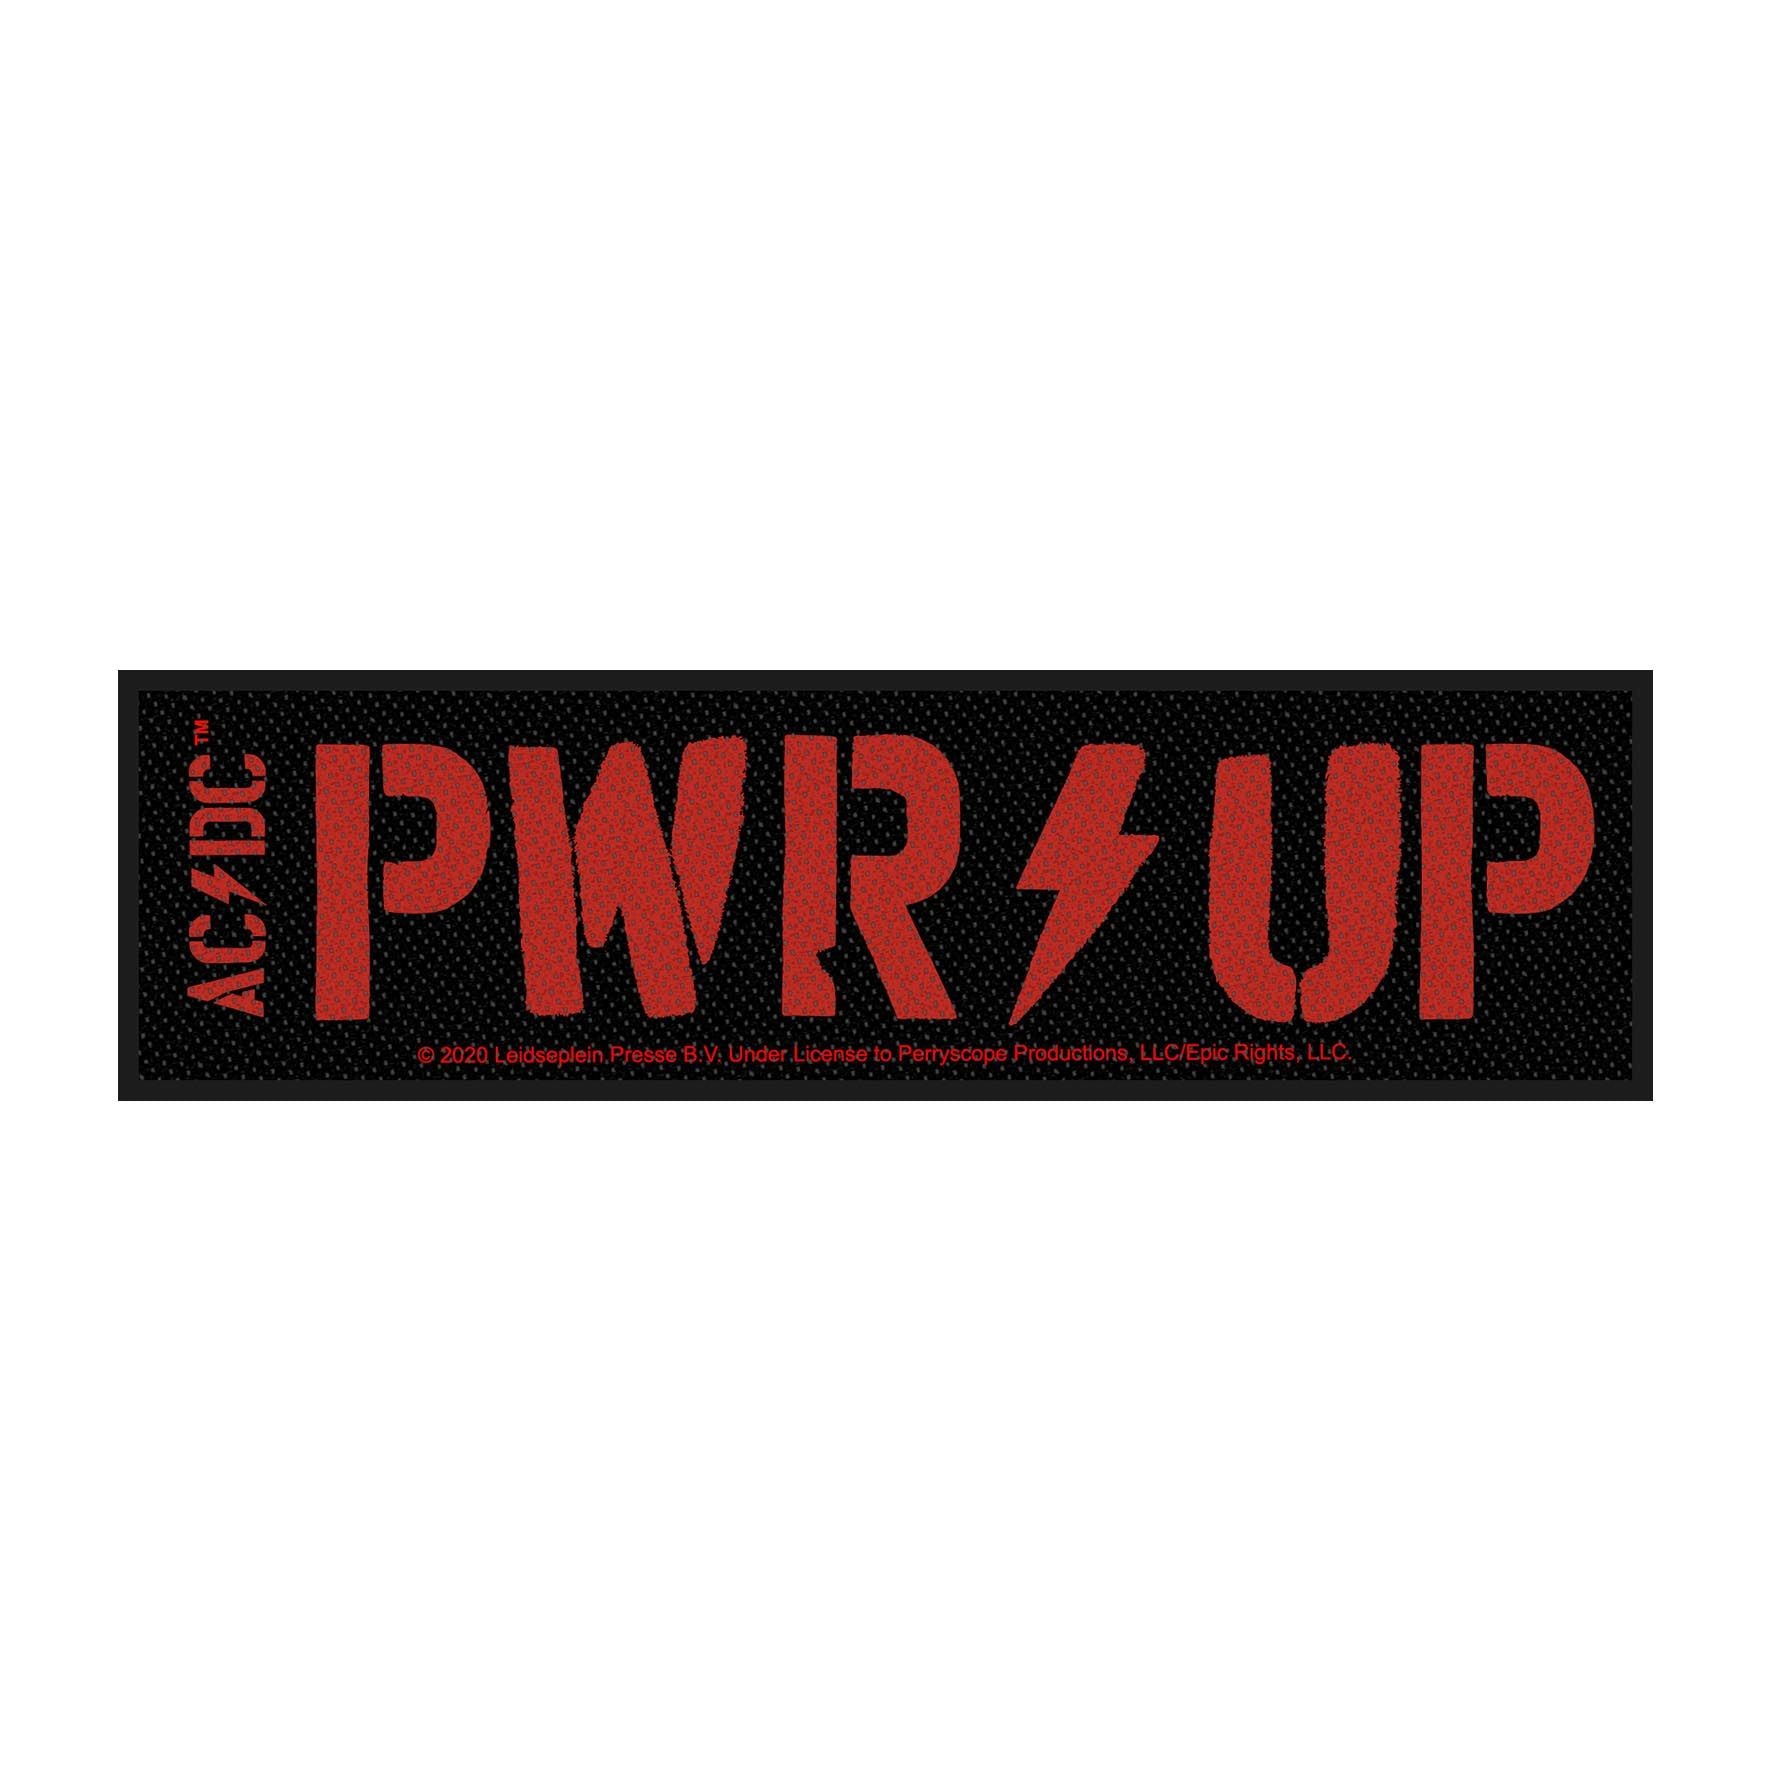 ACDC - PWR UP Strip (145mm x 50mm) Sew-On Patch